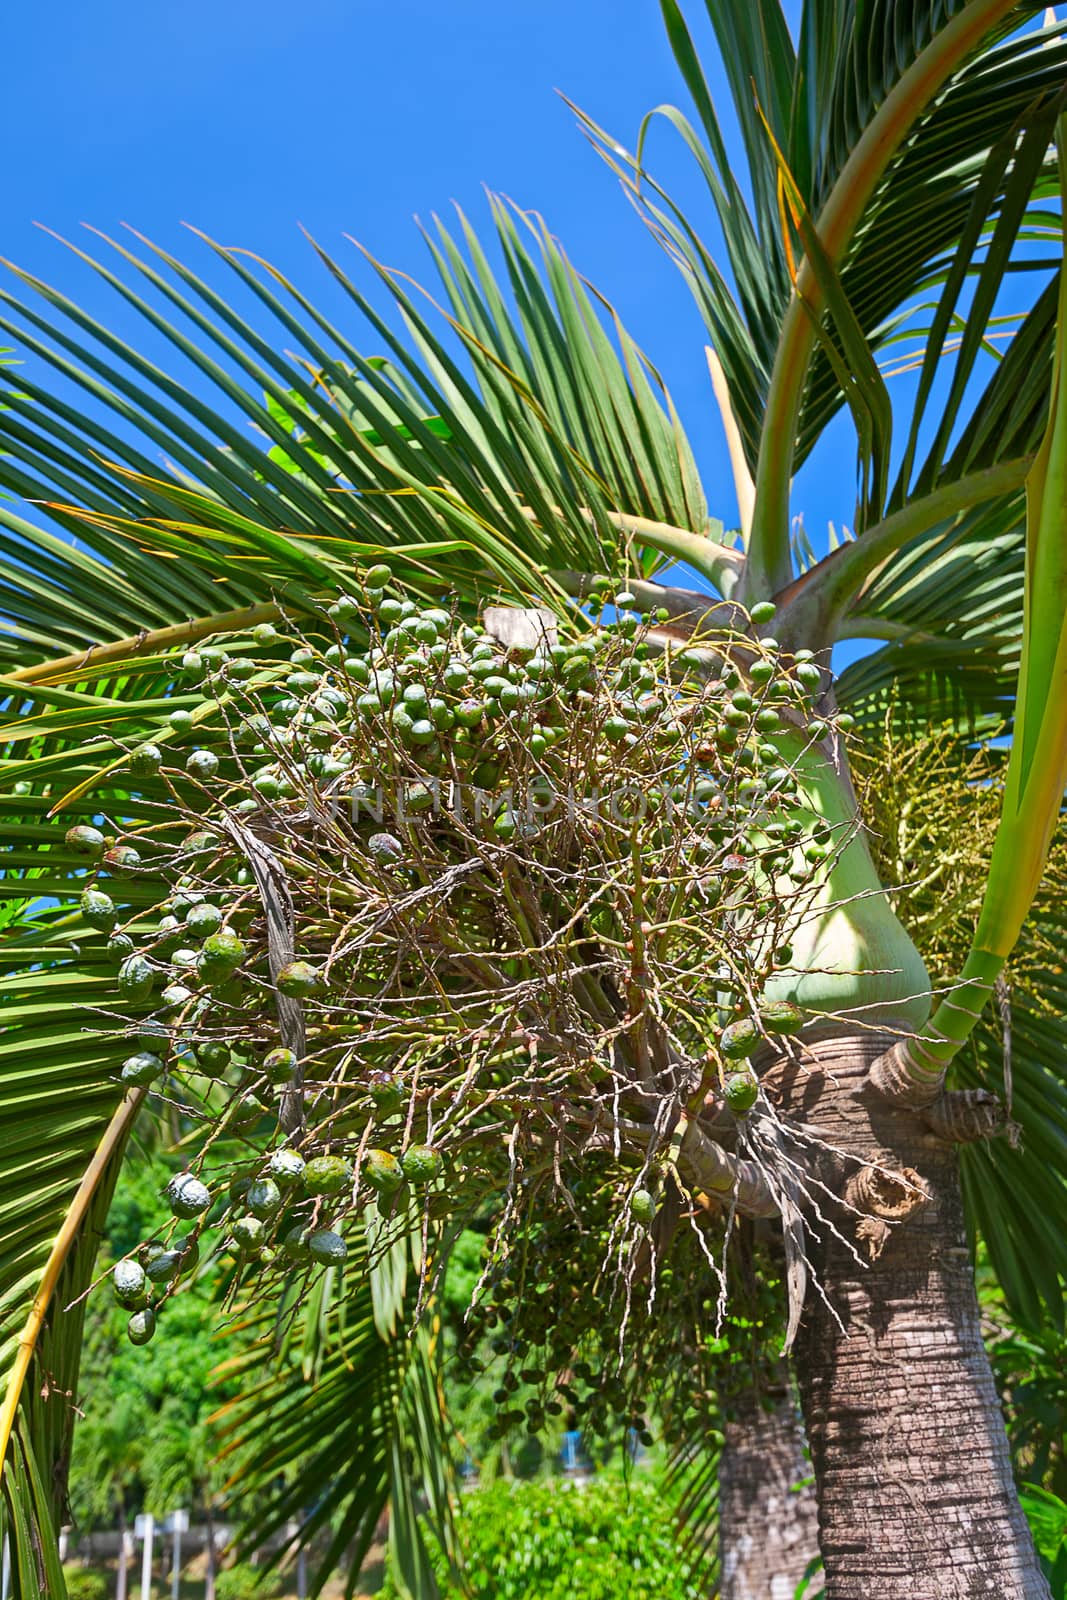 Palm tree with fruits on a background of leaves and blue sky, Thailand.